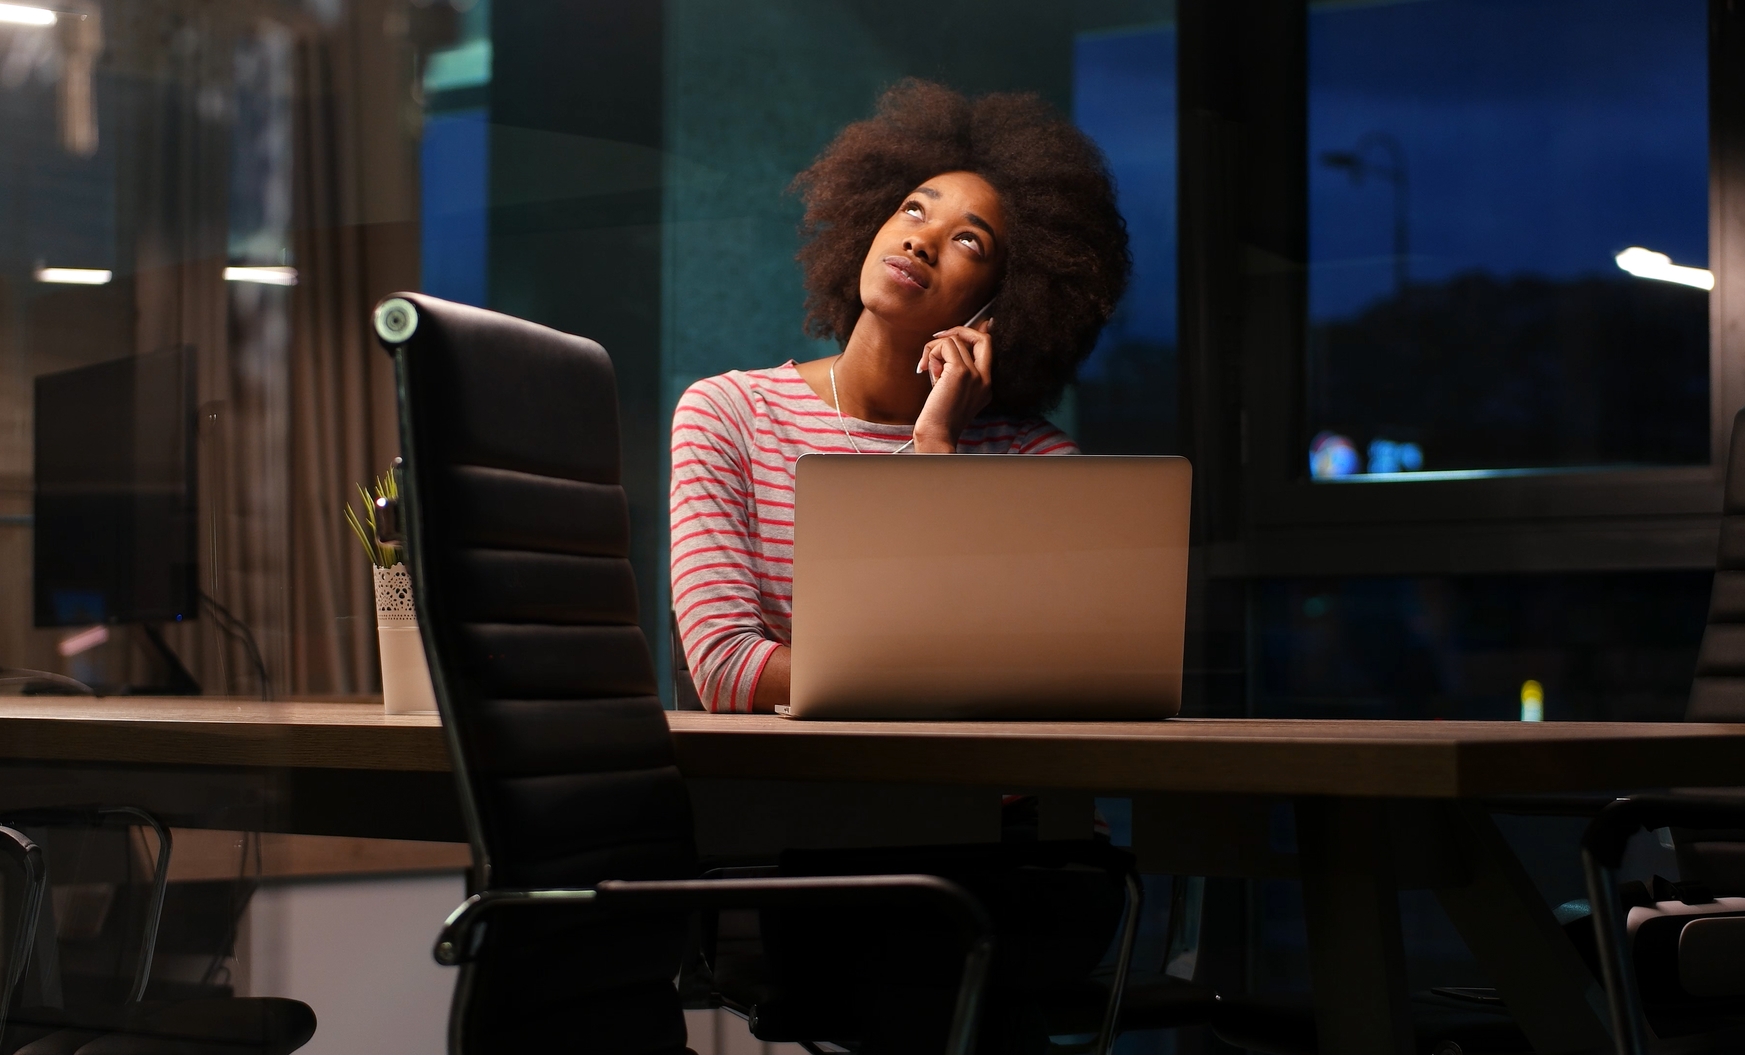 A person with curly hair, wearing a striped shirt, is looking up thoughtfully while sitting at a desk with an open laptop. The office environment around them is dimly lit, suggesting it's evening or night outside the window.